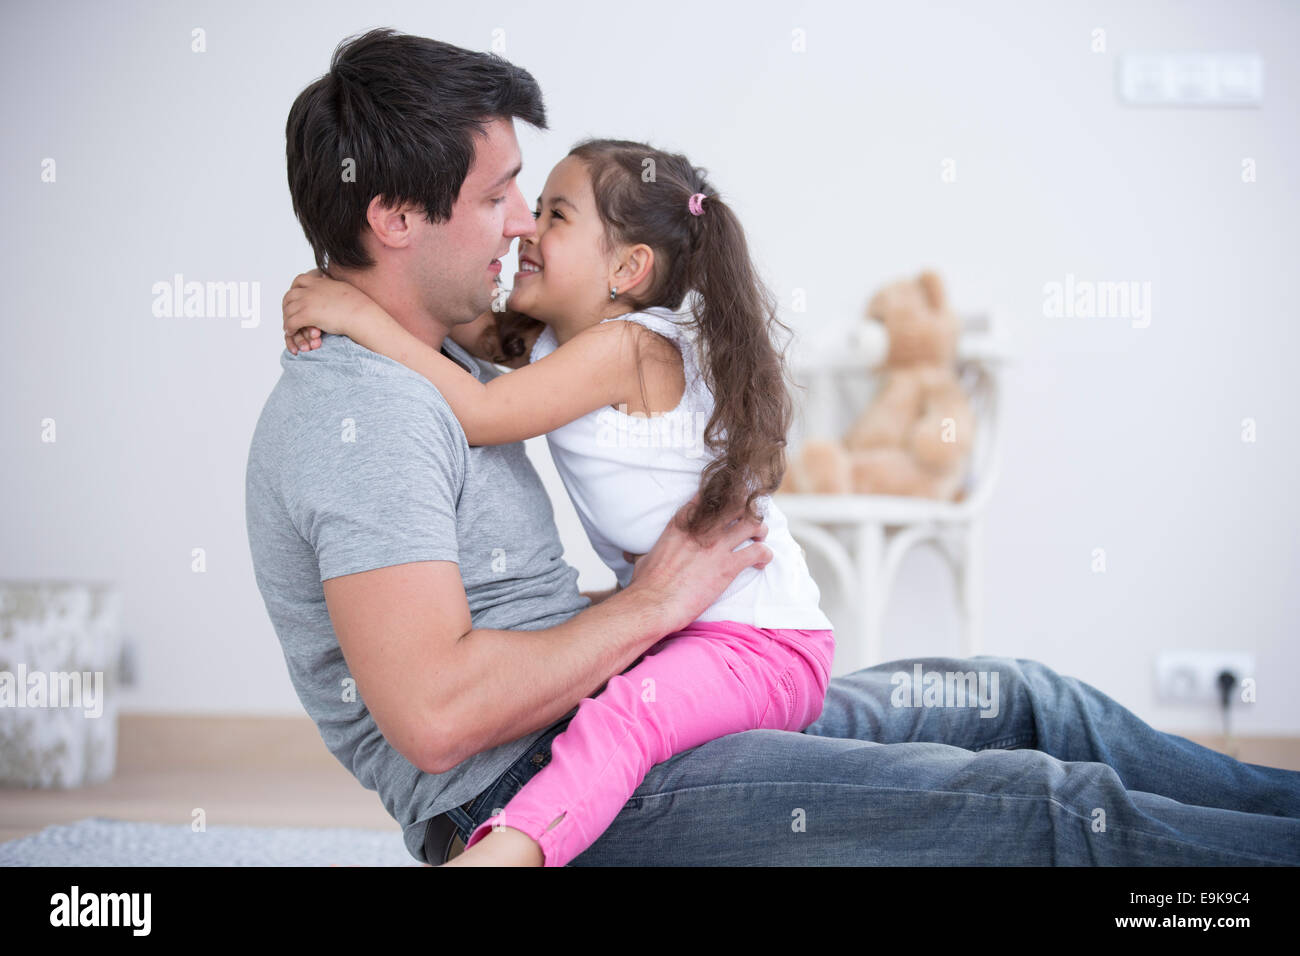 Side view of father and daughter spending quality time at home Stock Photo